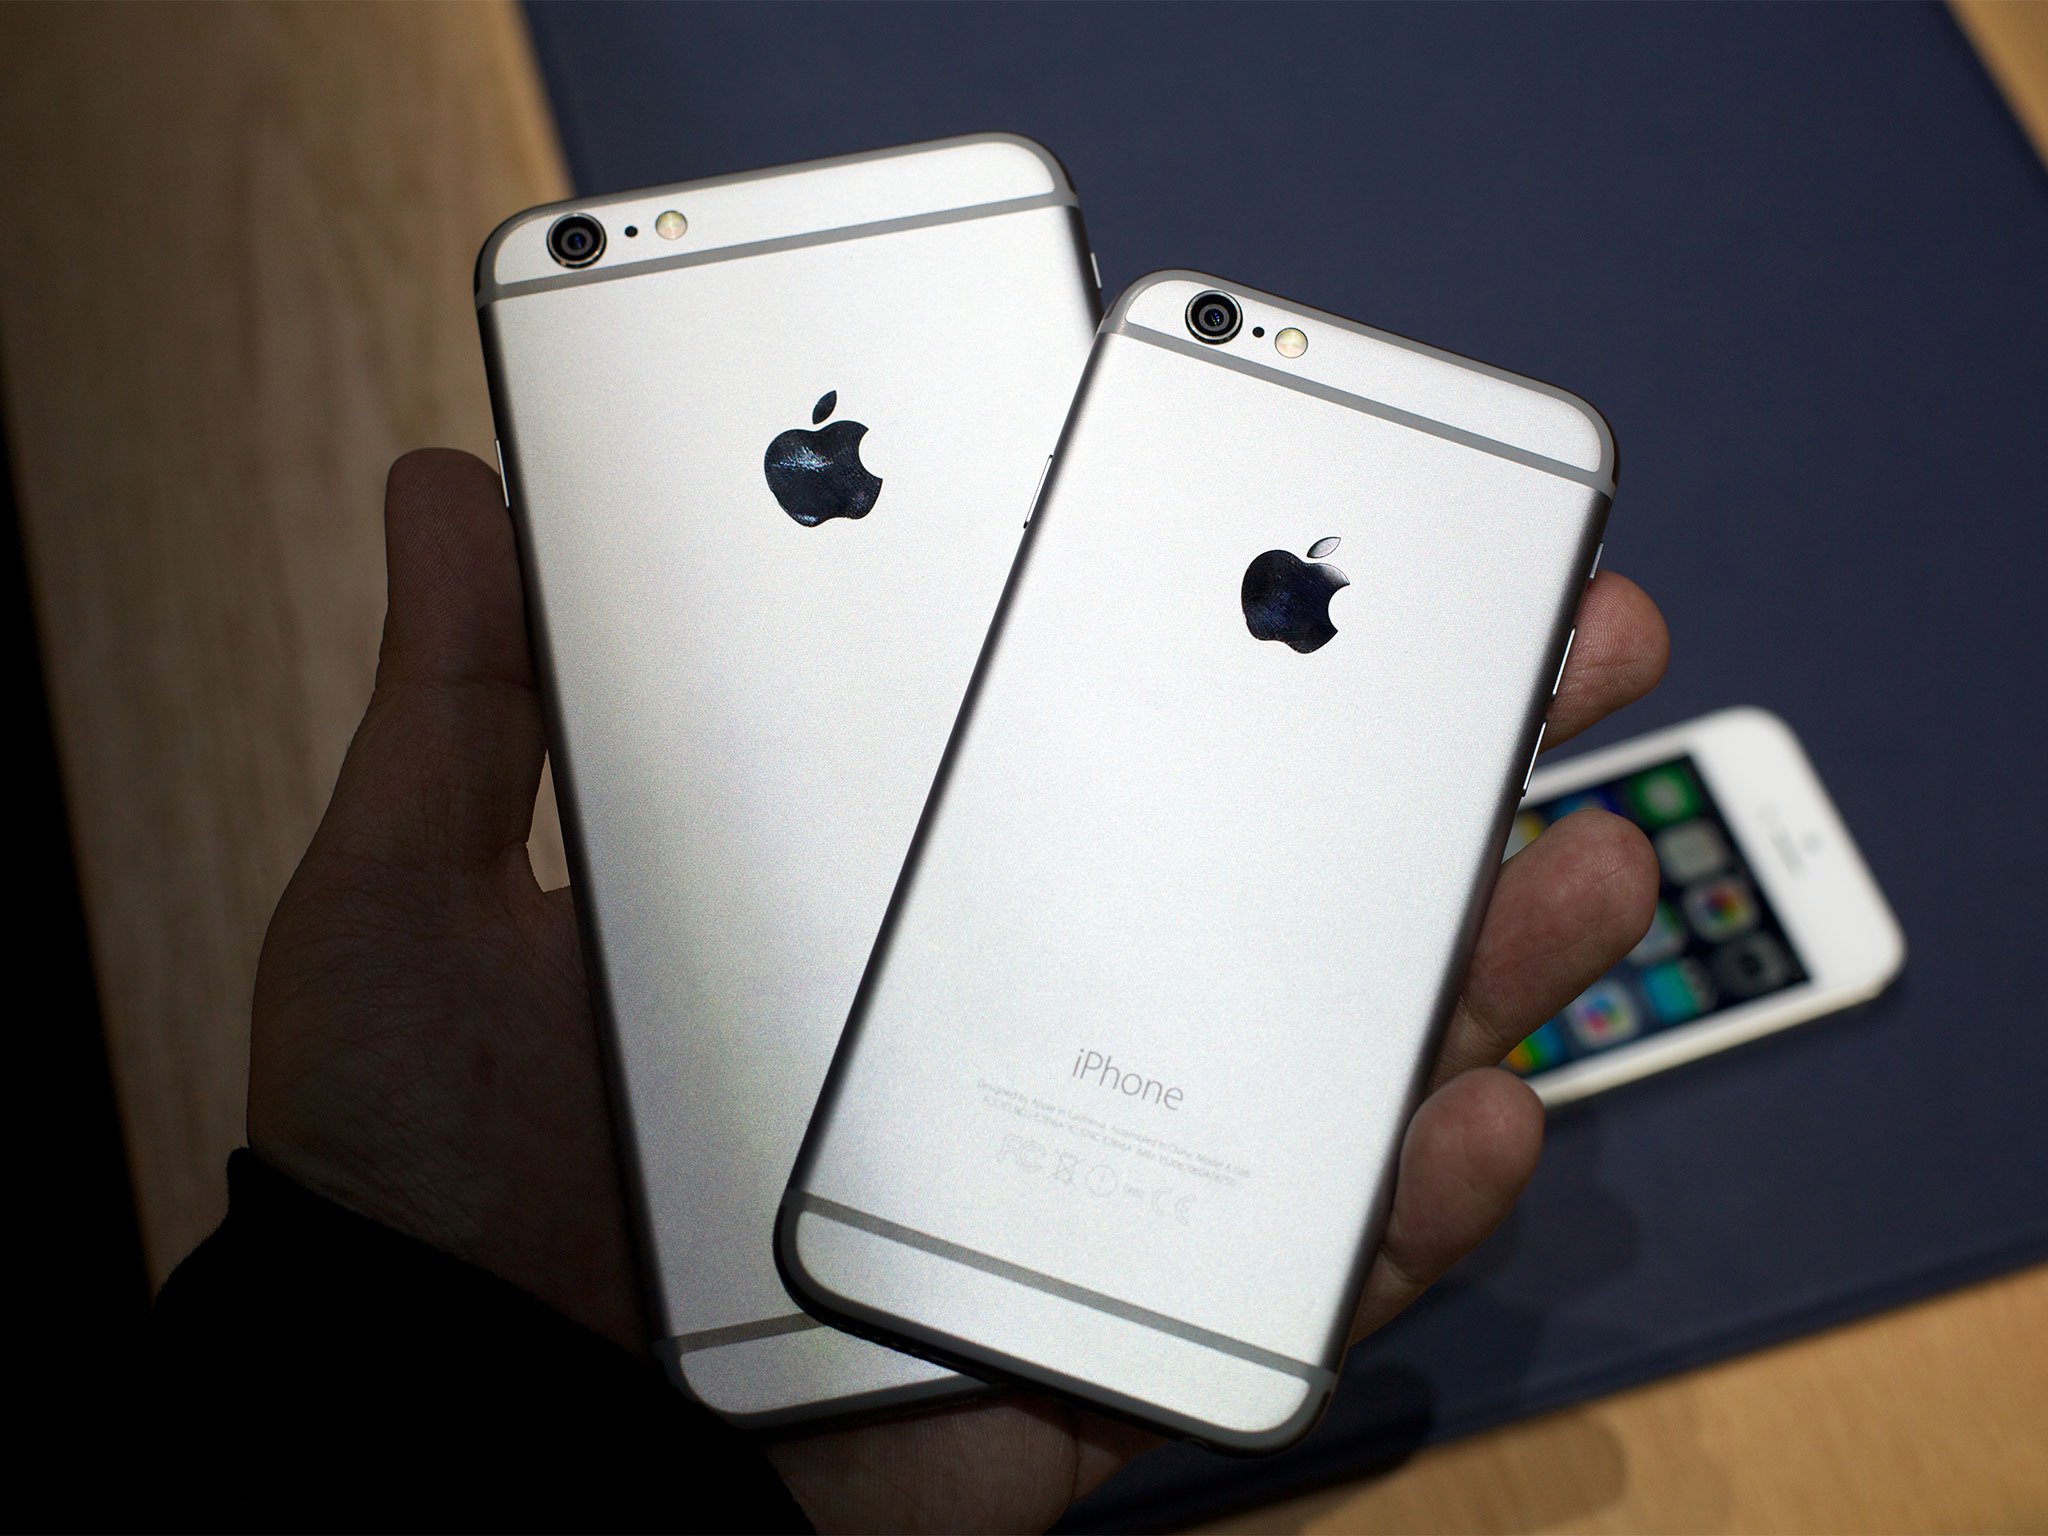 Rogers vs. Bell vs. TELUS: Which Canadian iPhone 6 or iPhone 6 Plus carrier should you sign up with?